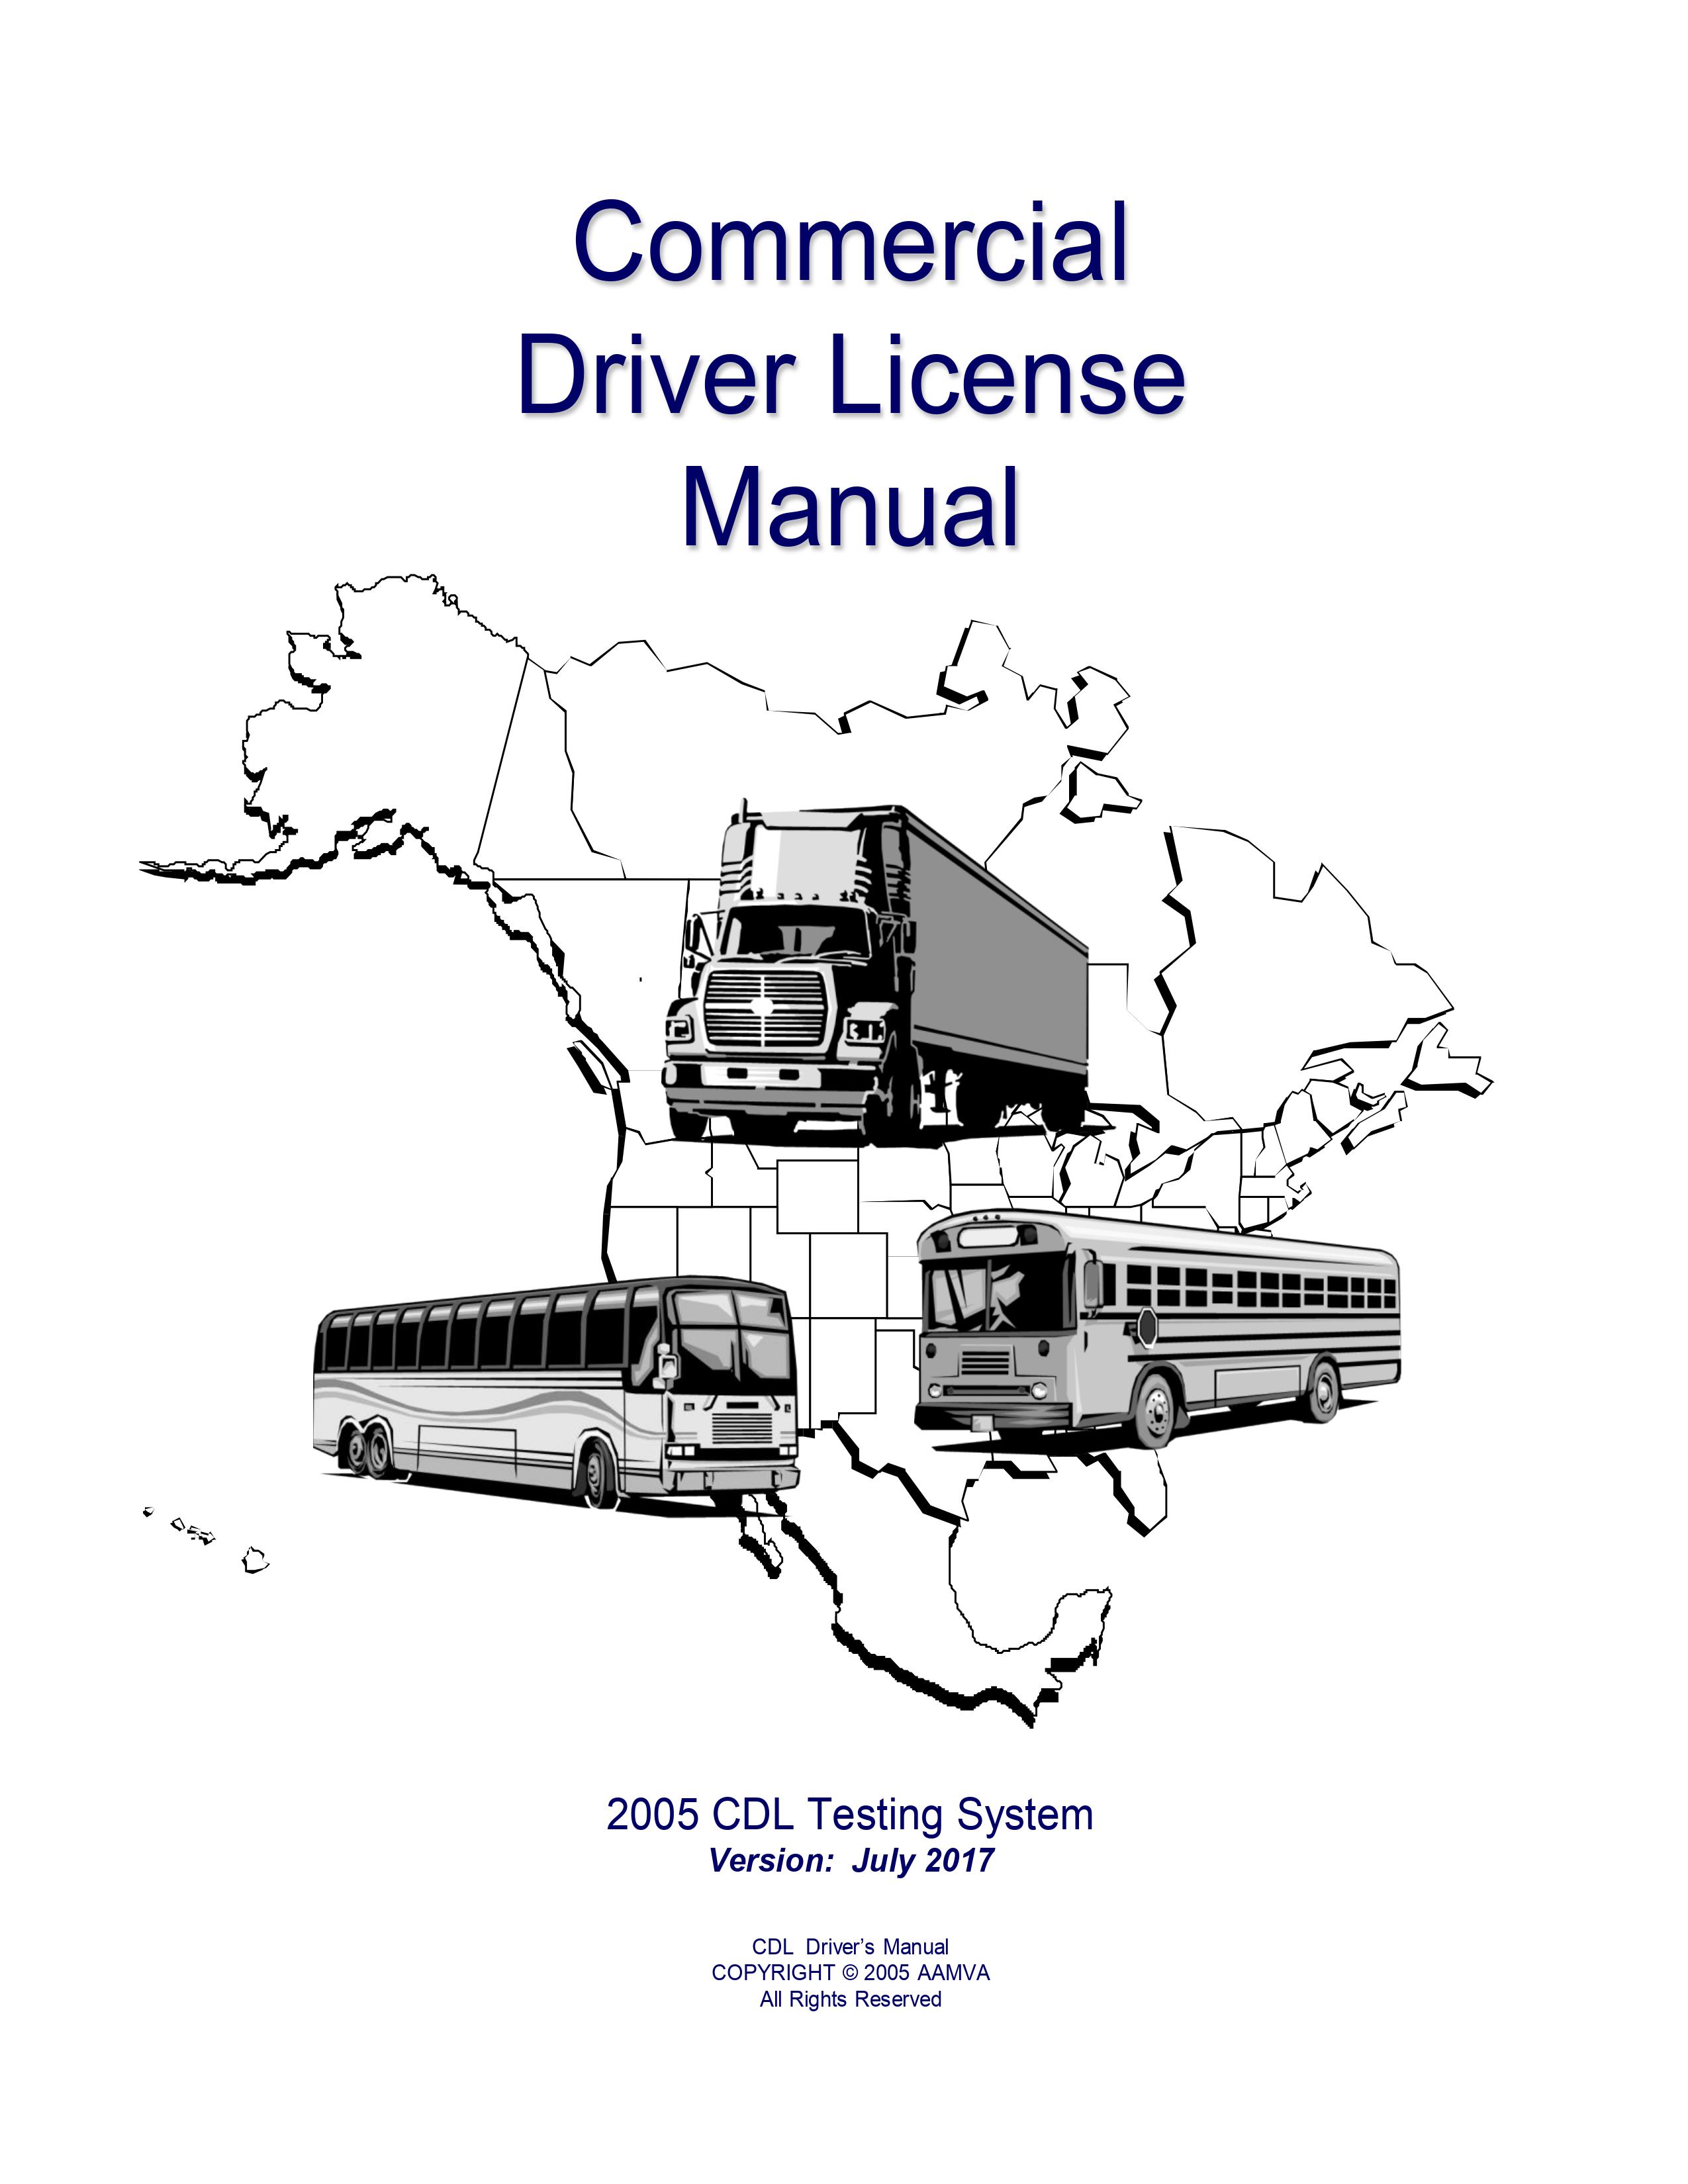 New Mexico's CDL Manual